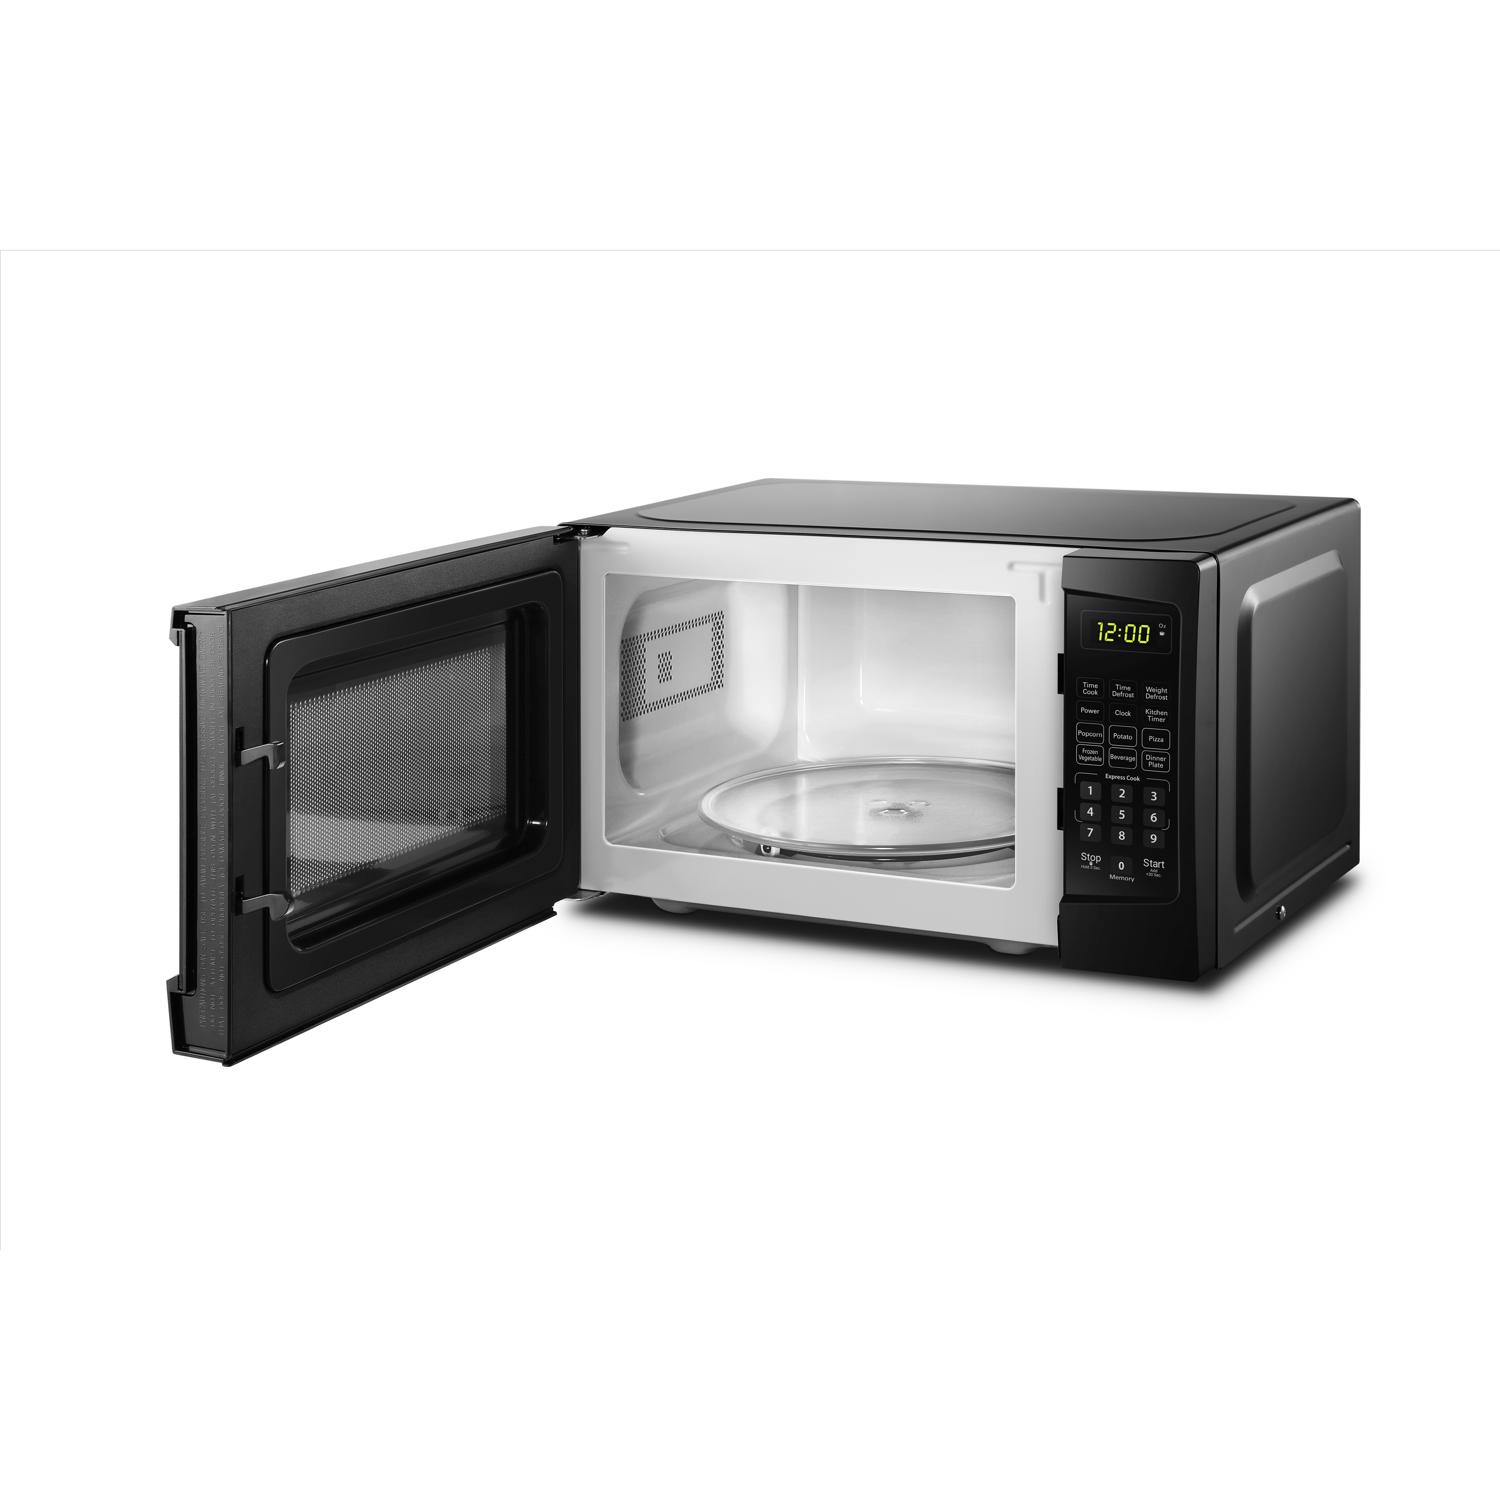 Avanti 1.1 Cu. ft. Stainless Steel Microwave Oven 1000 W Mirror-Finish